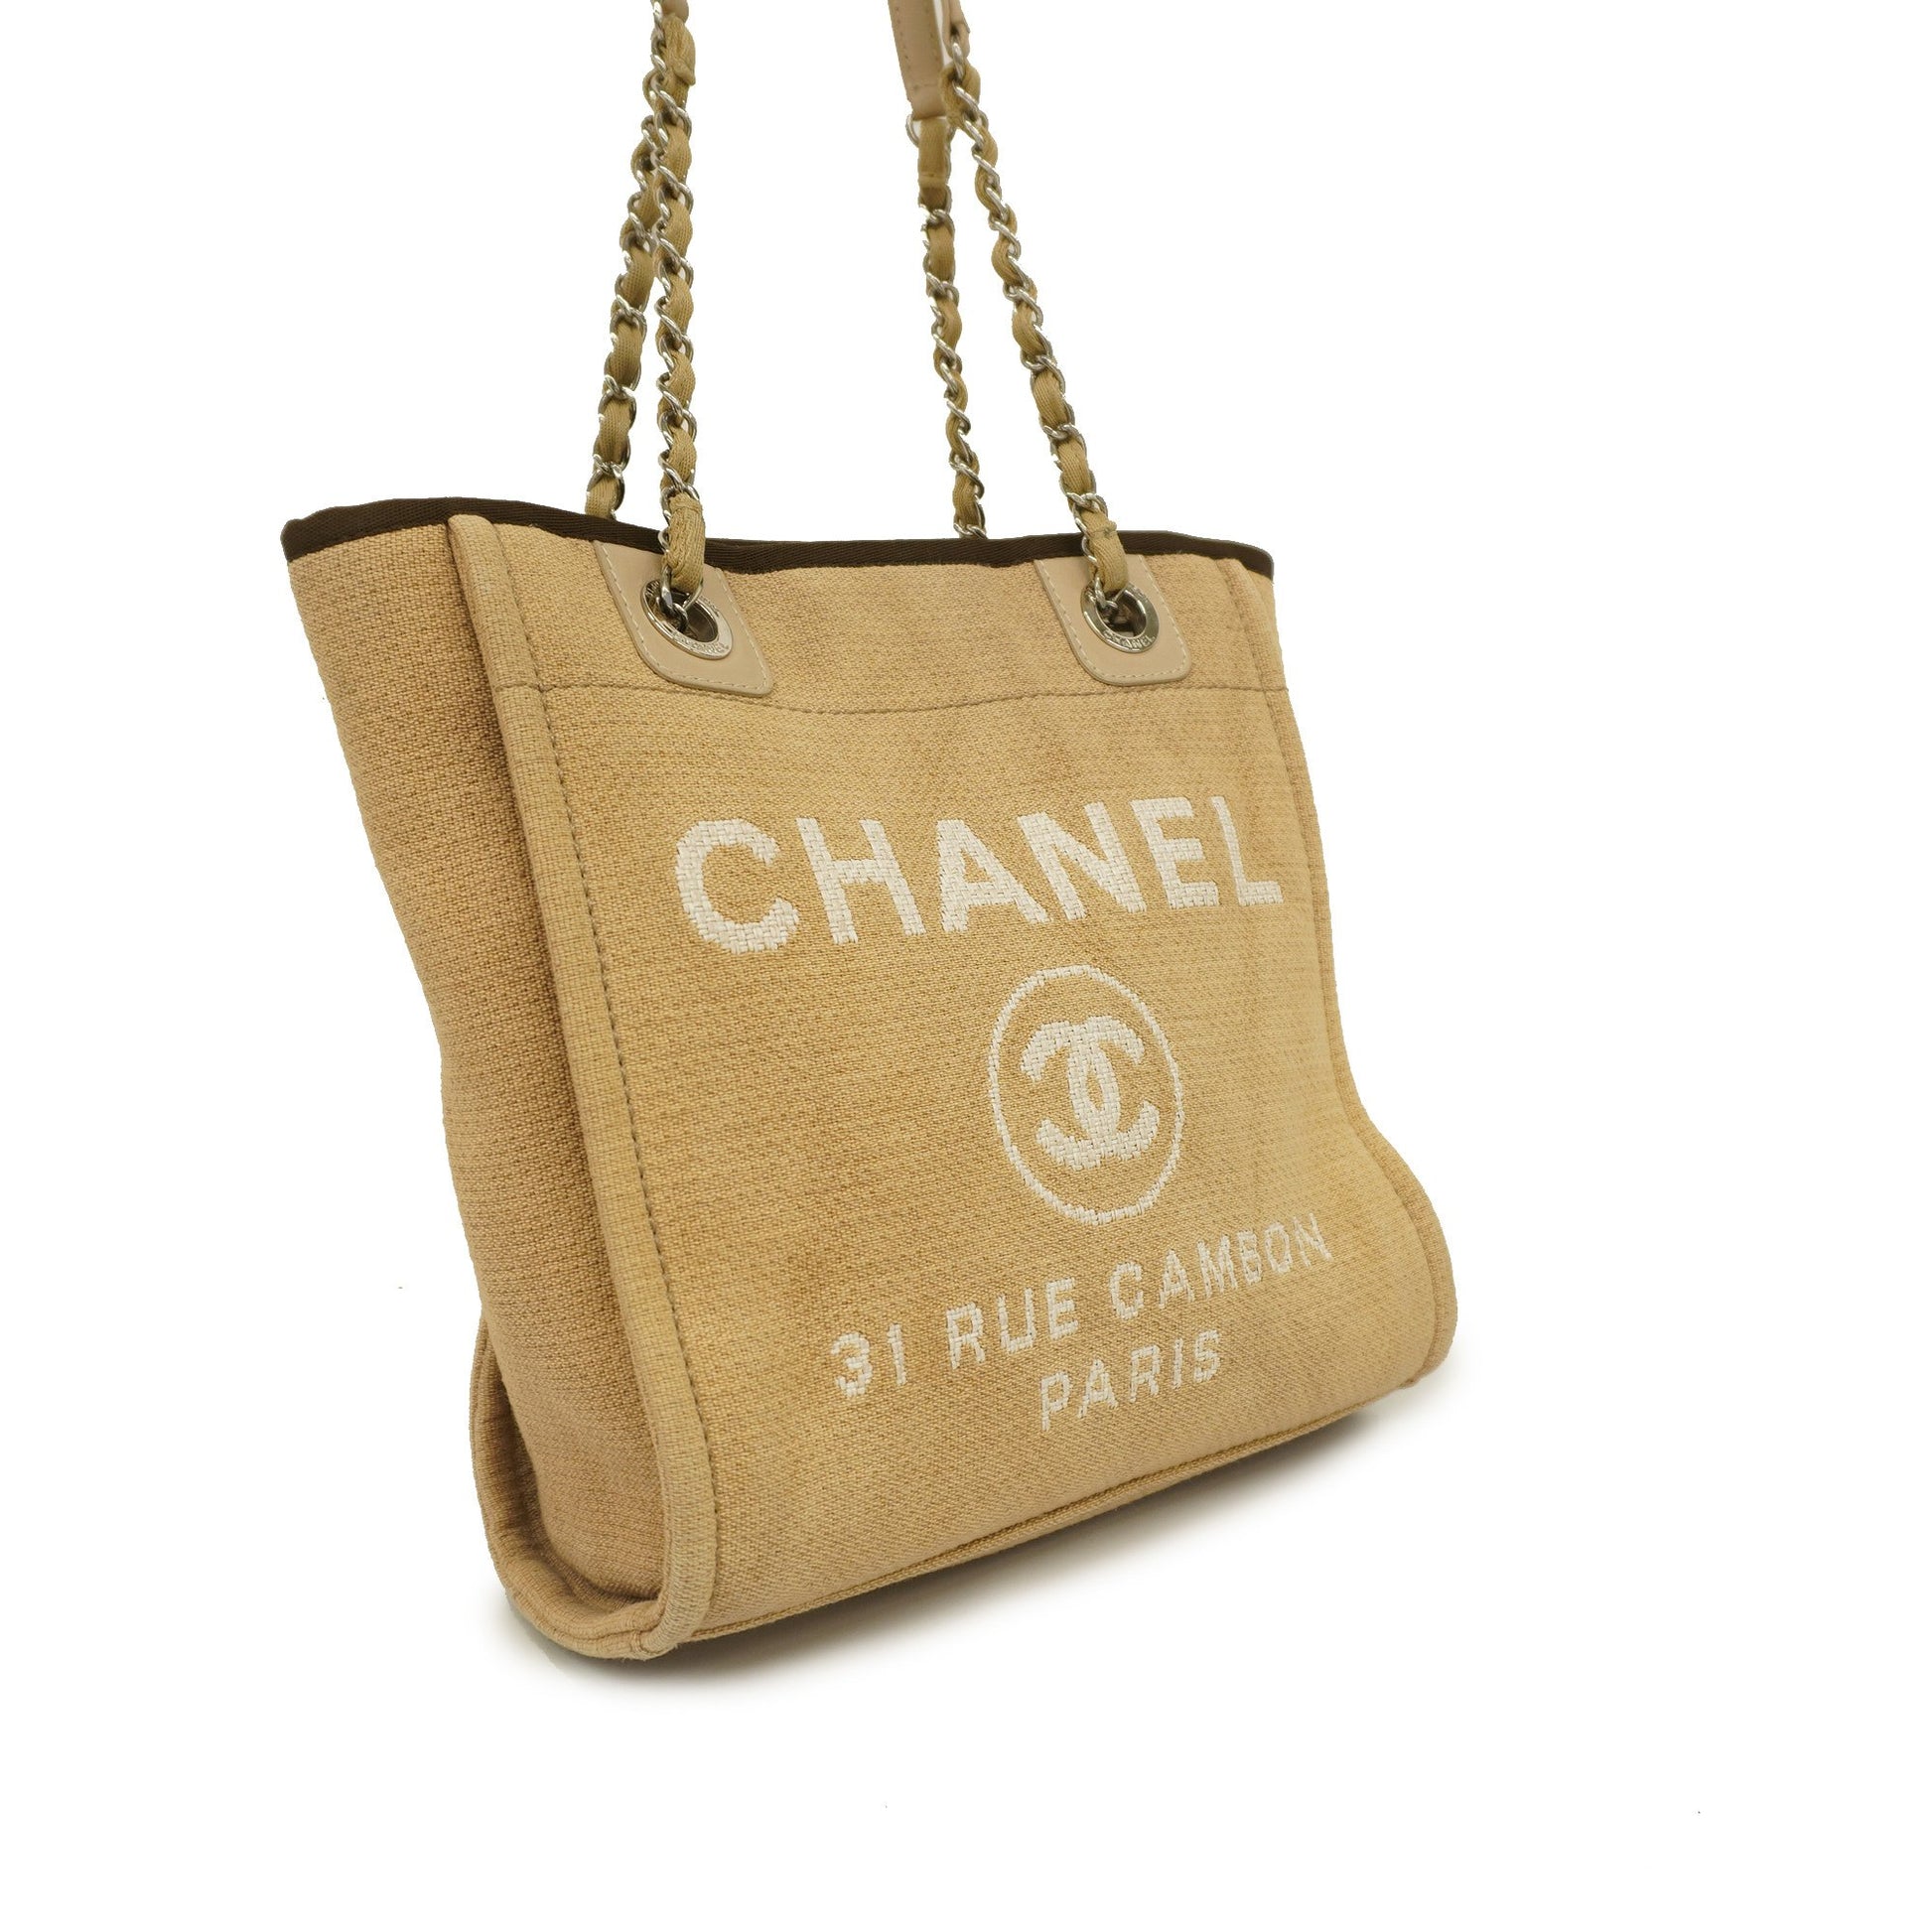 Chanel tote bag Deauville canvas beige silver metal